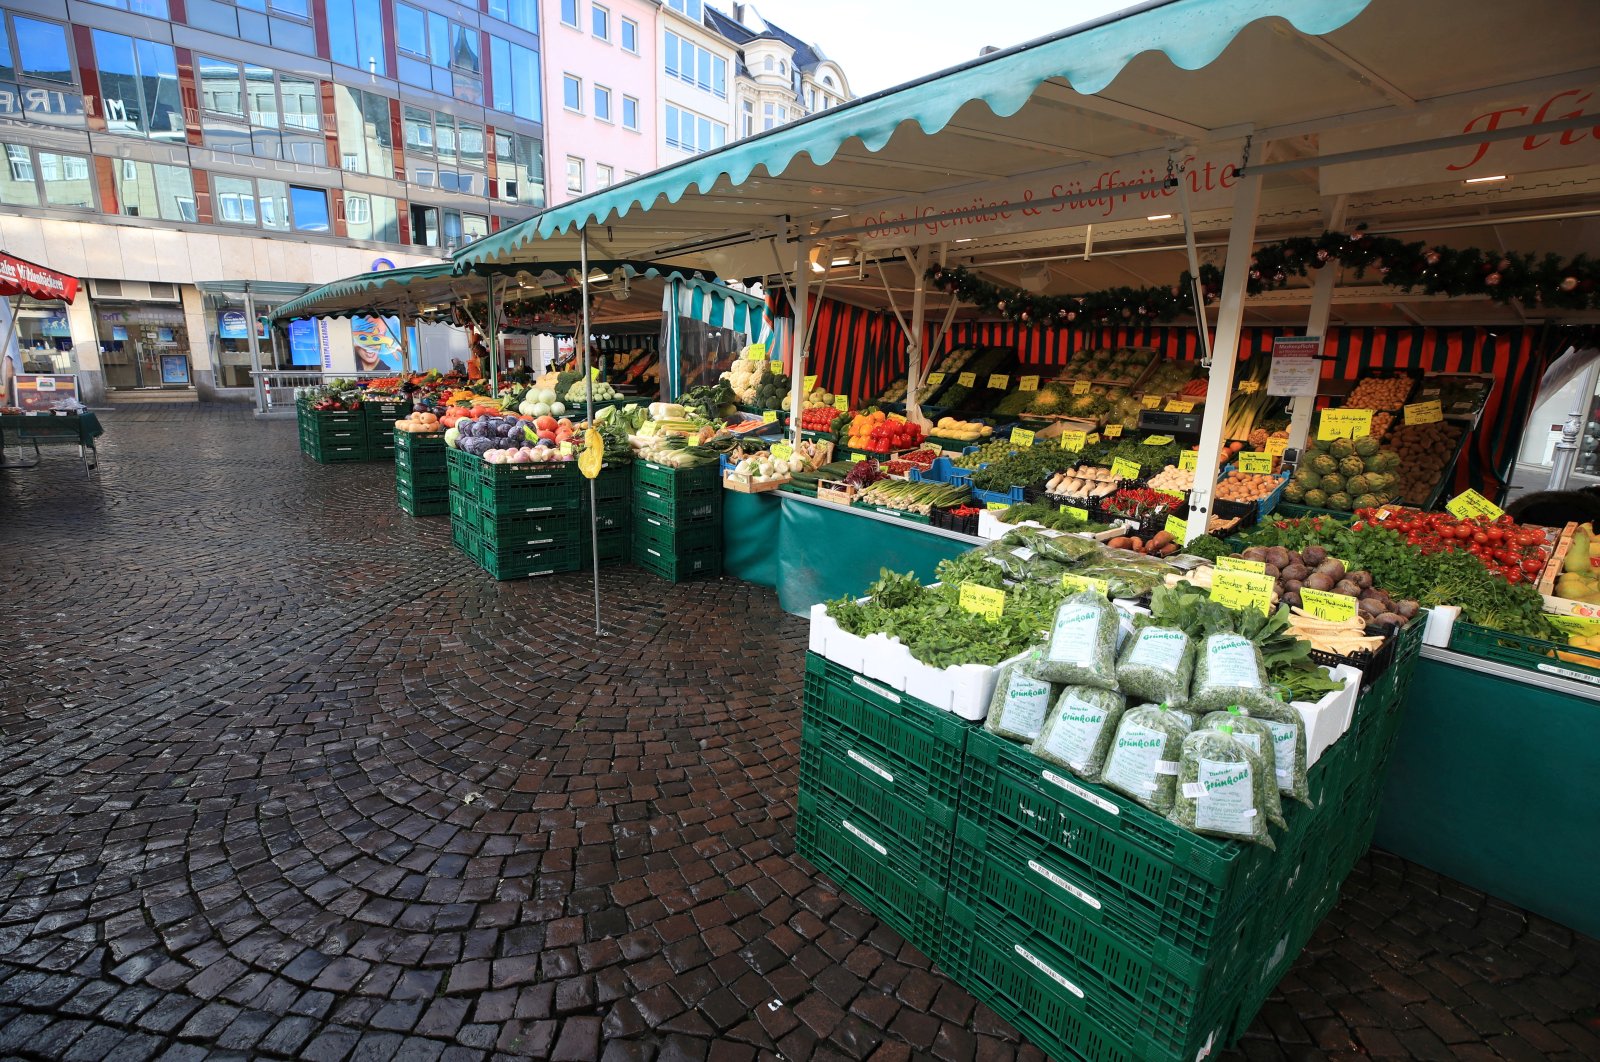 A fruit and vegetable market in Bonn, Germany, Dec. 16, 2020. (Reuters Photo)